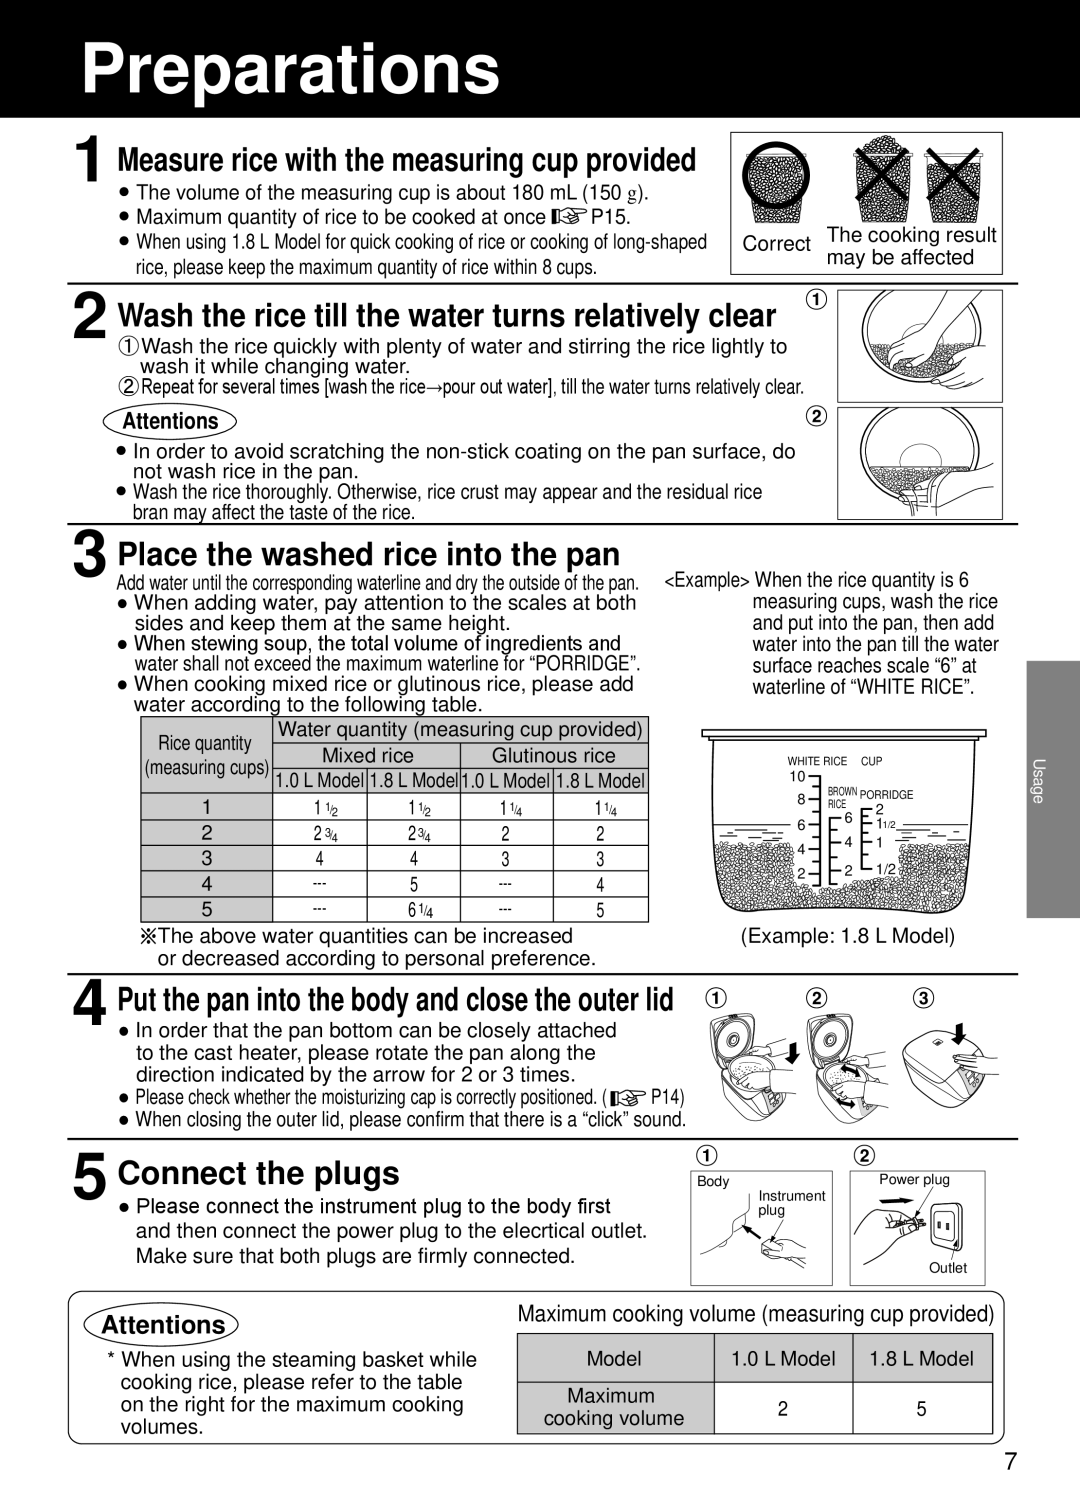 Panasonic SR/DF181 specifications Preparations, Place the washed rice into the pan, Connect the plugs, Attentions 